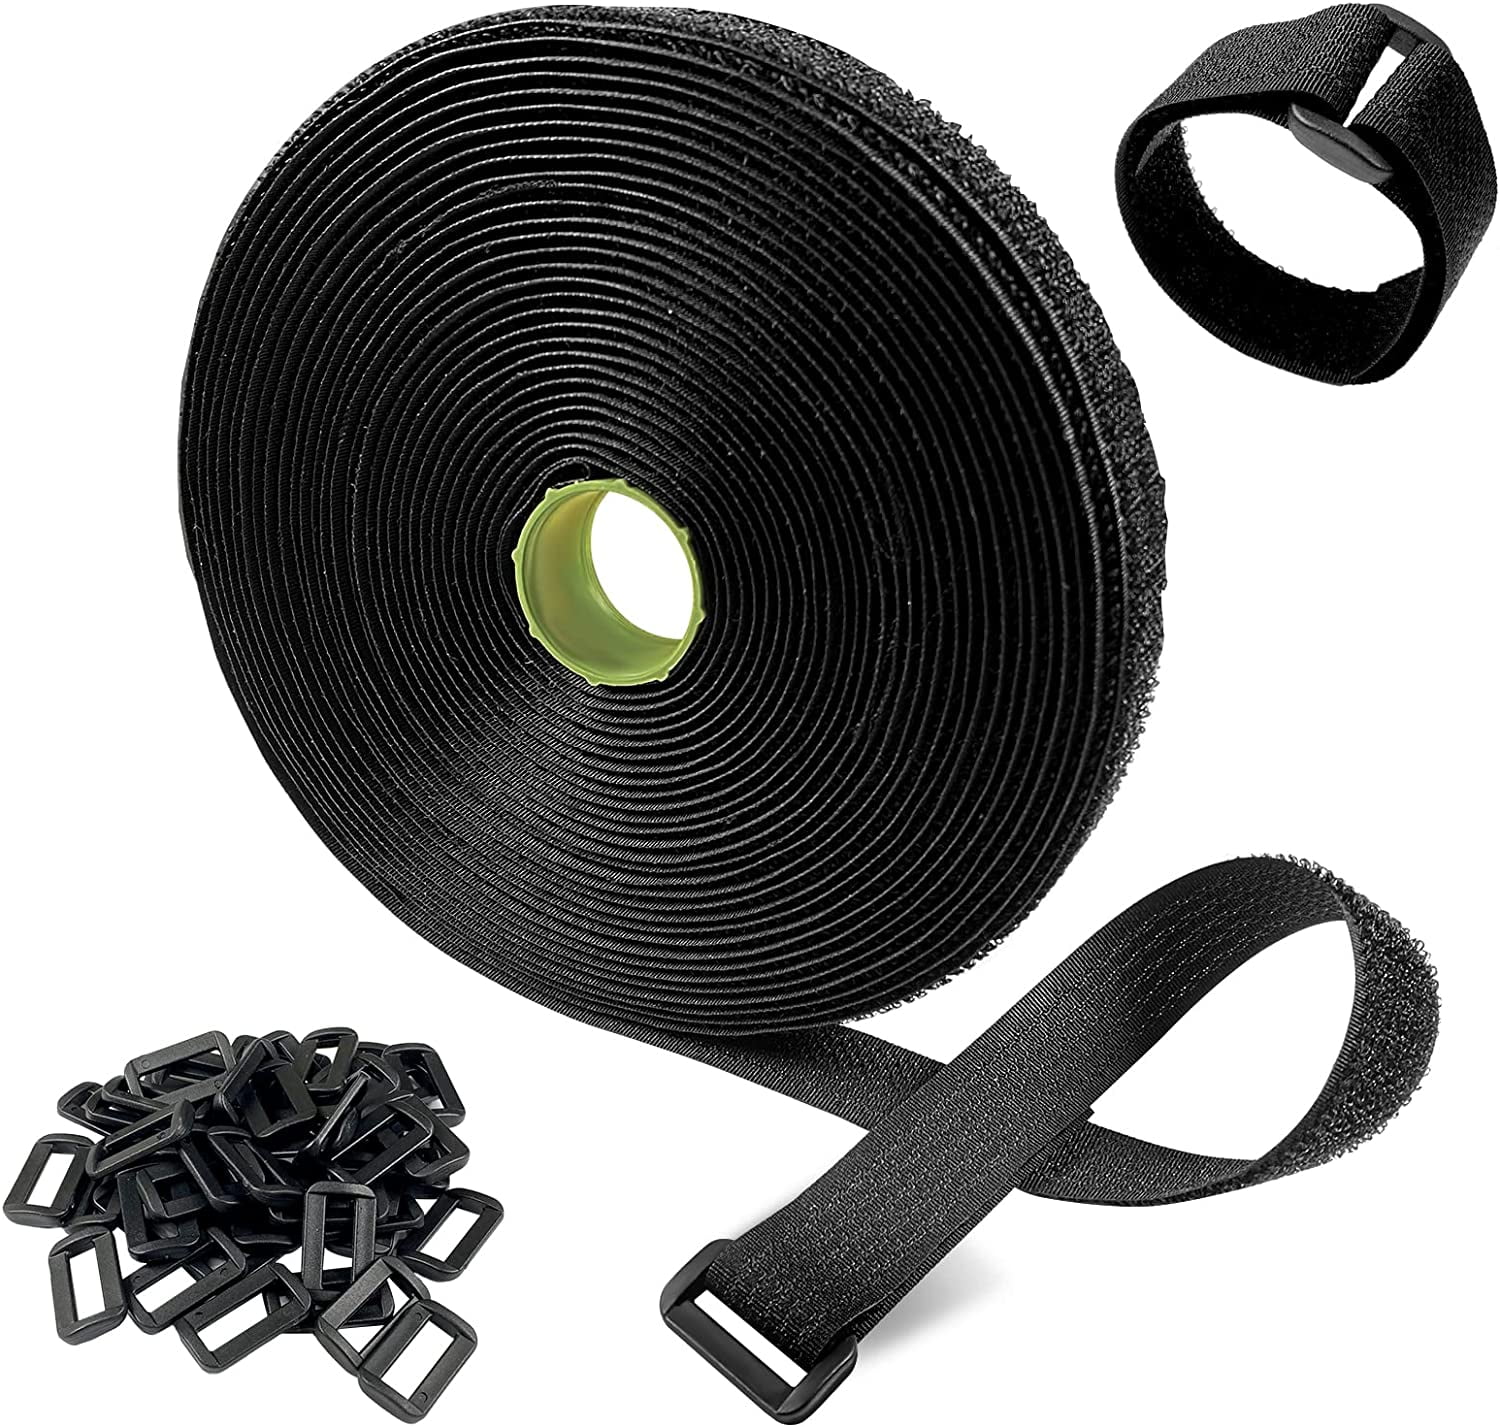 Black Electrical Tape – 10 Roll - Cable Ties Plus